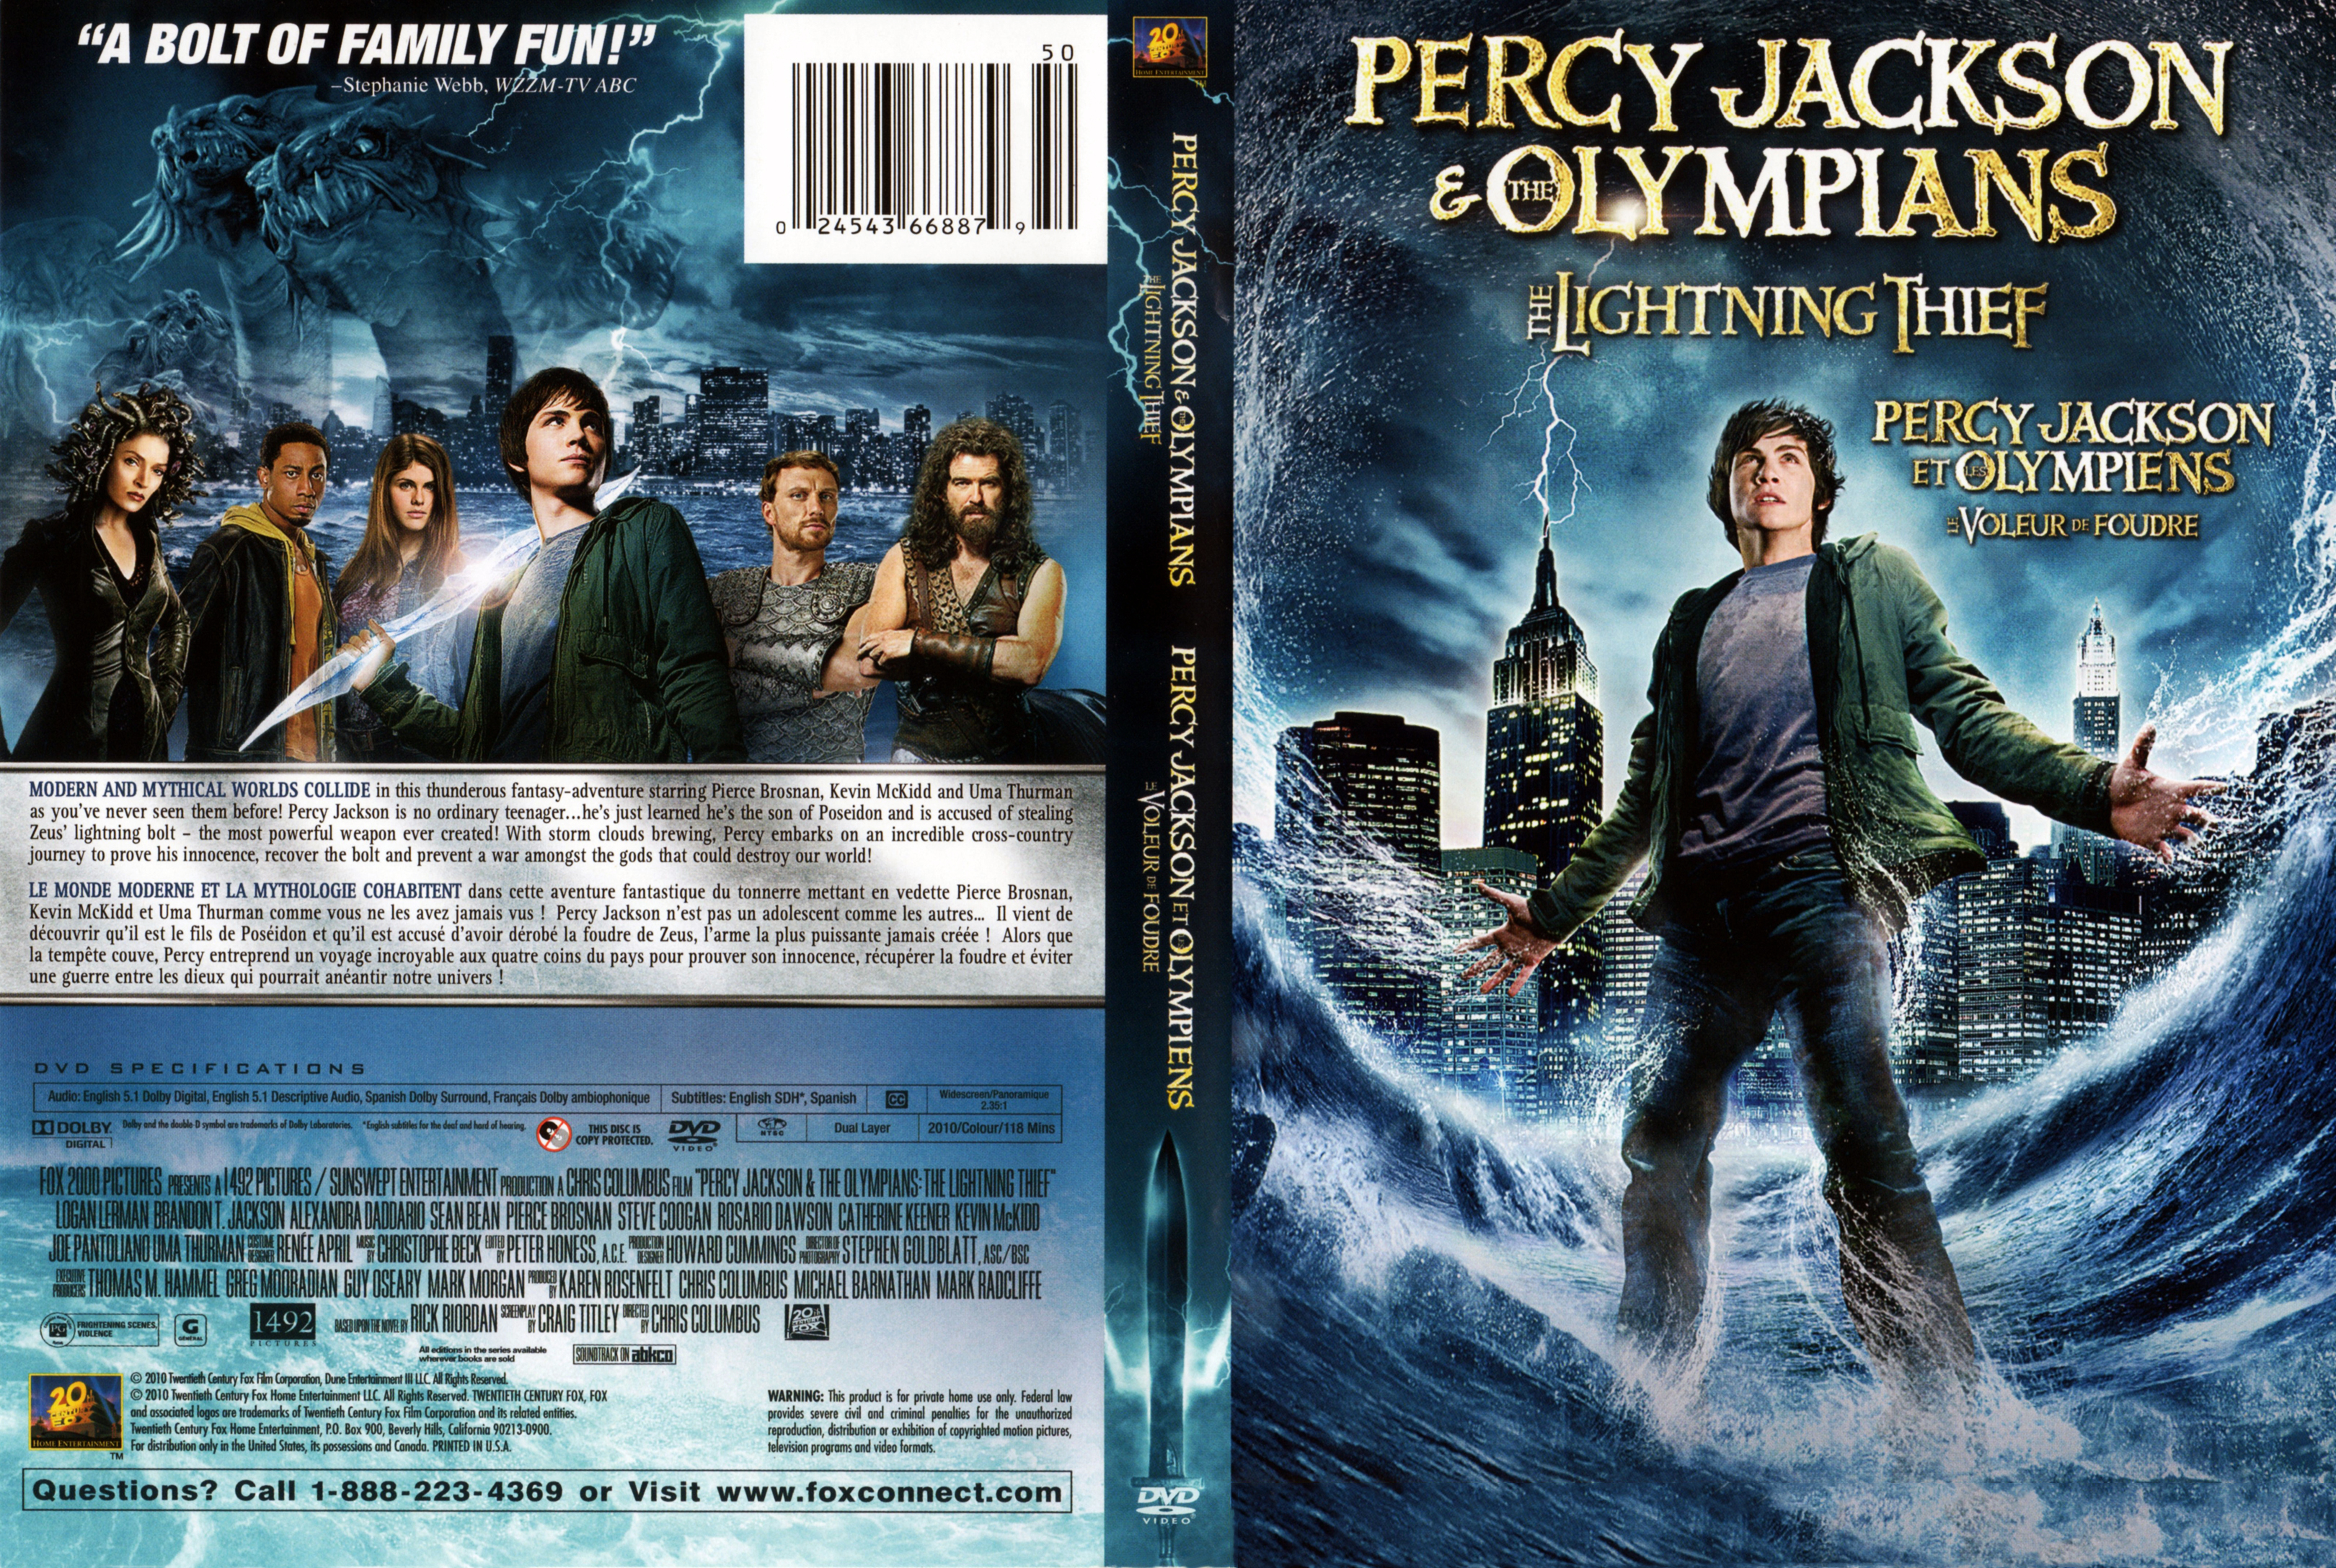 Jaquette DVD Percy Jackson The Olympians The Lightning Thief (Canadienne)